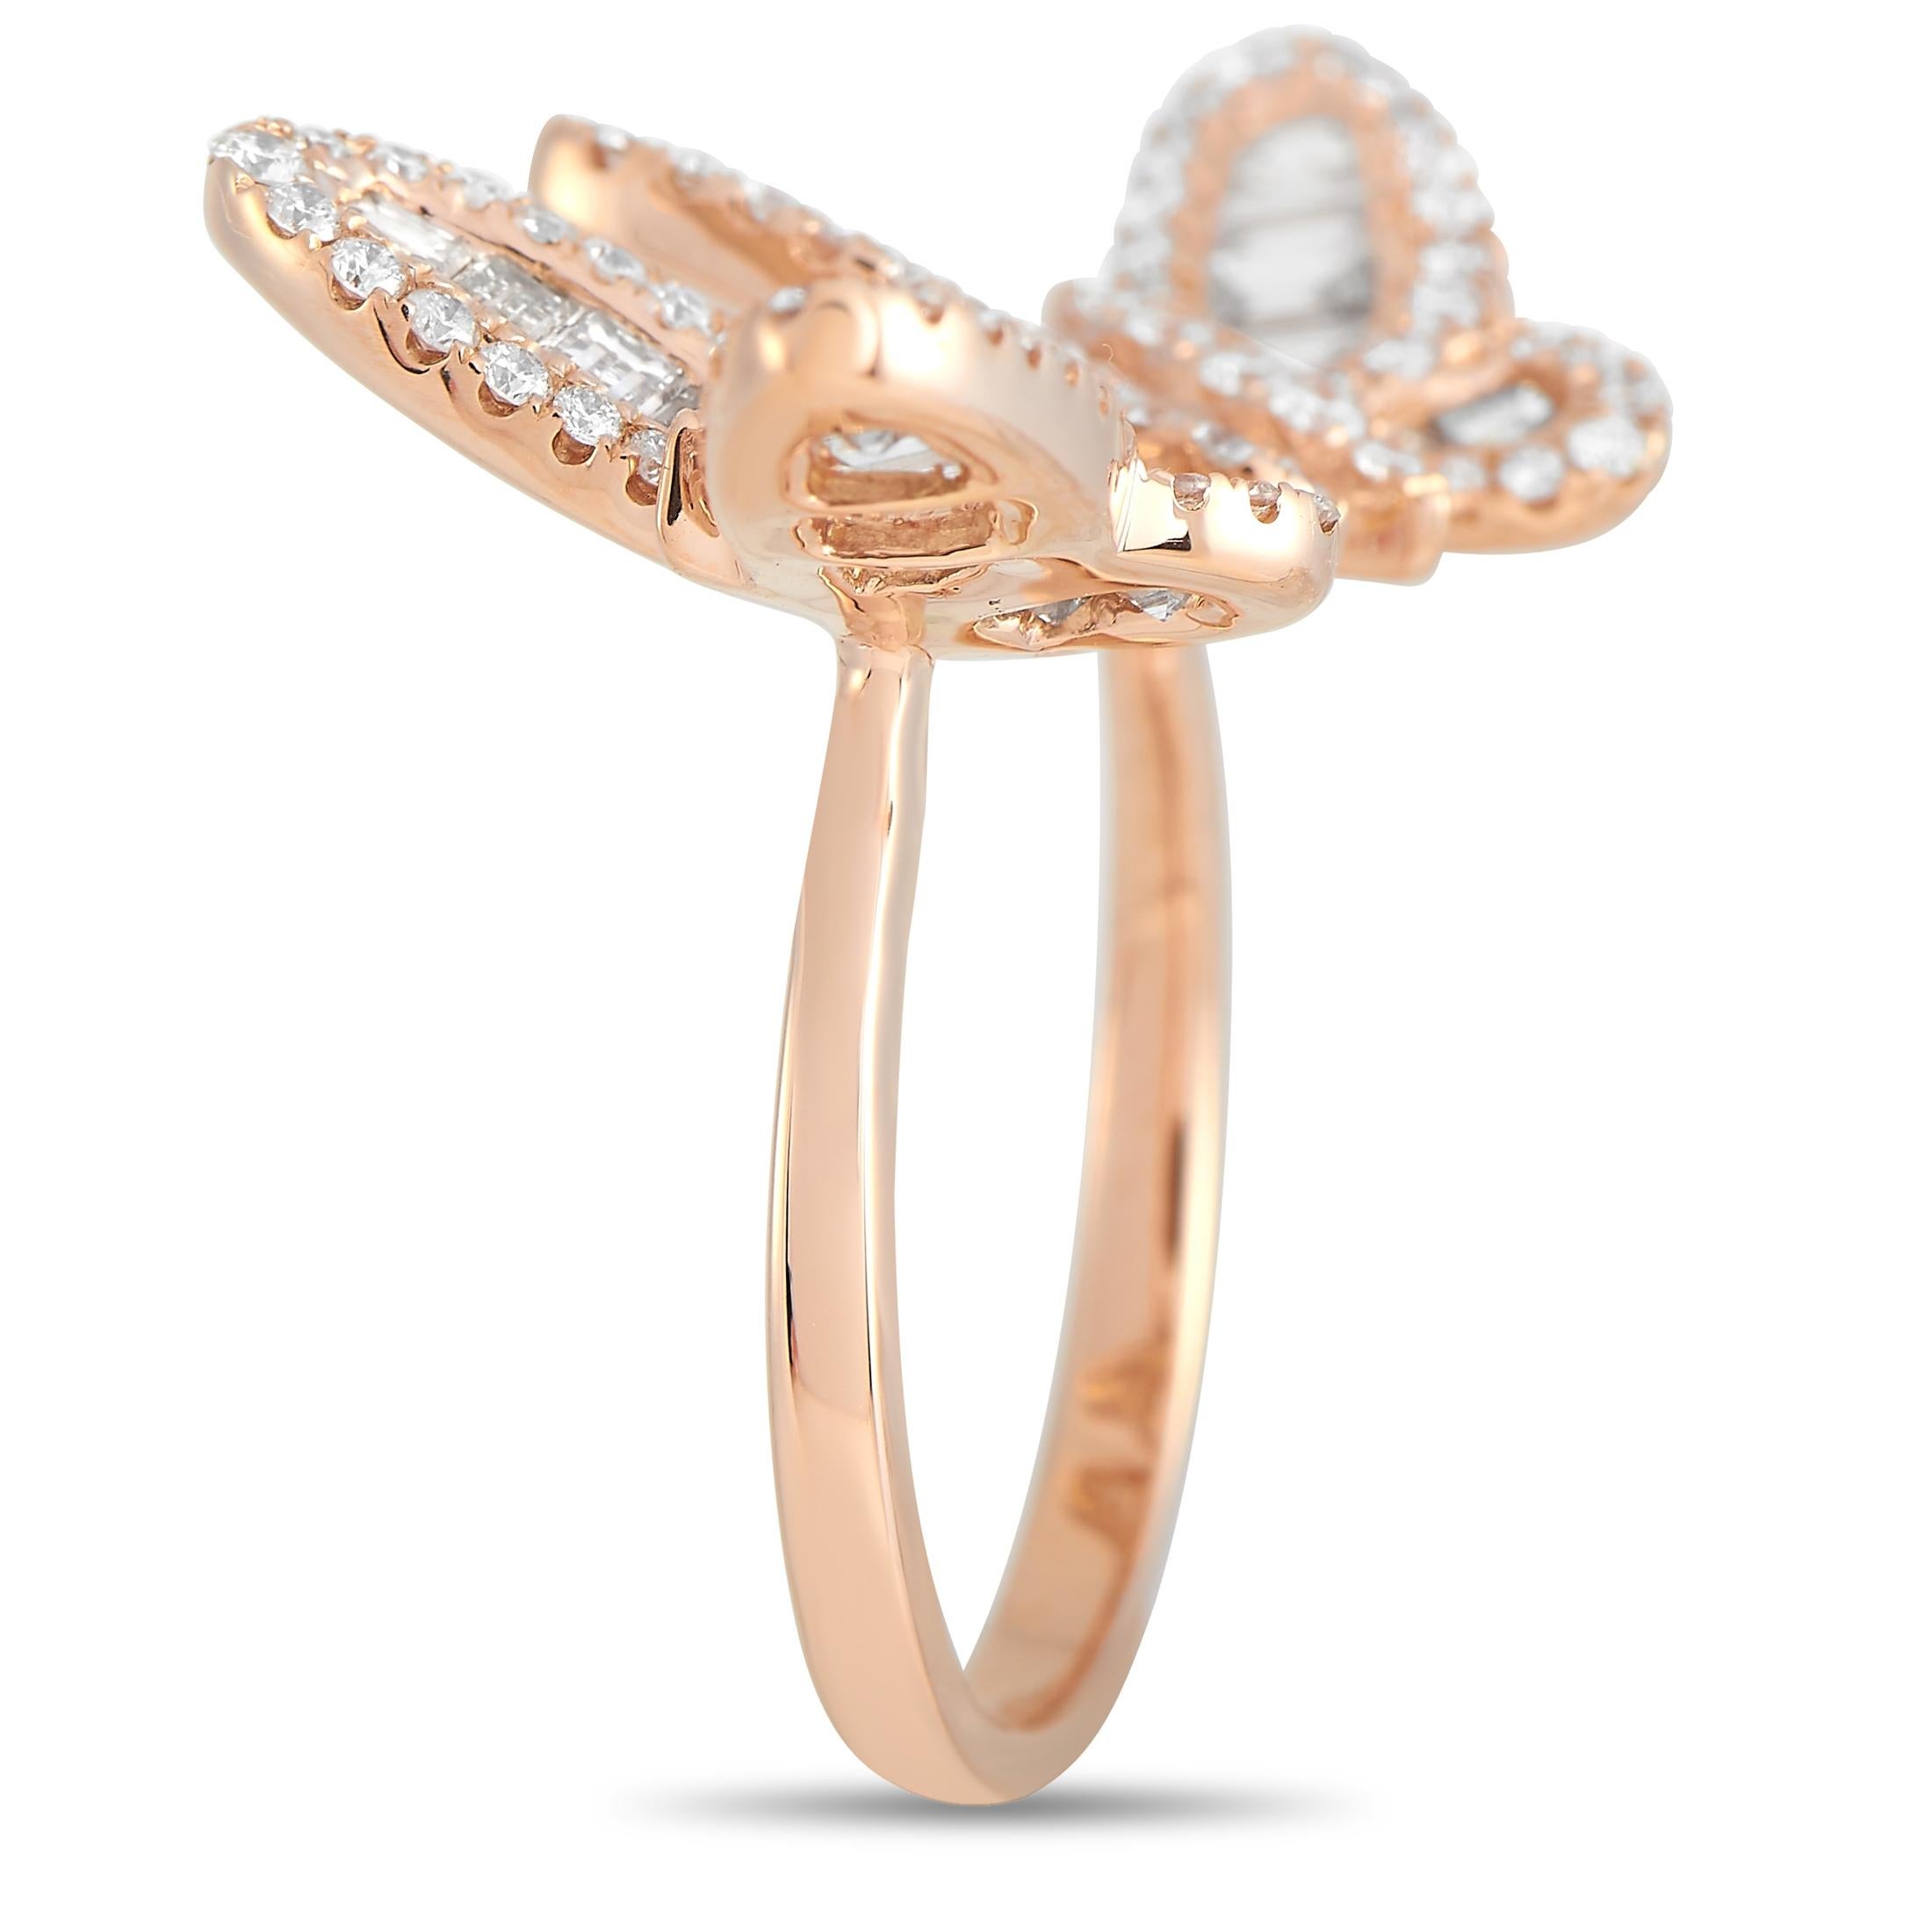 This unique LB Exclusive ring is made with 18K rose gold and wraps around the finger, meeting in the front with two pretty butterflies, each set with 0.74 carats of round diamonds to form the butterflies body and outline the wings. The wings are